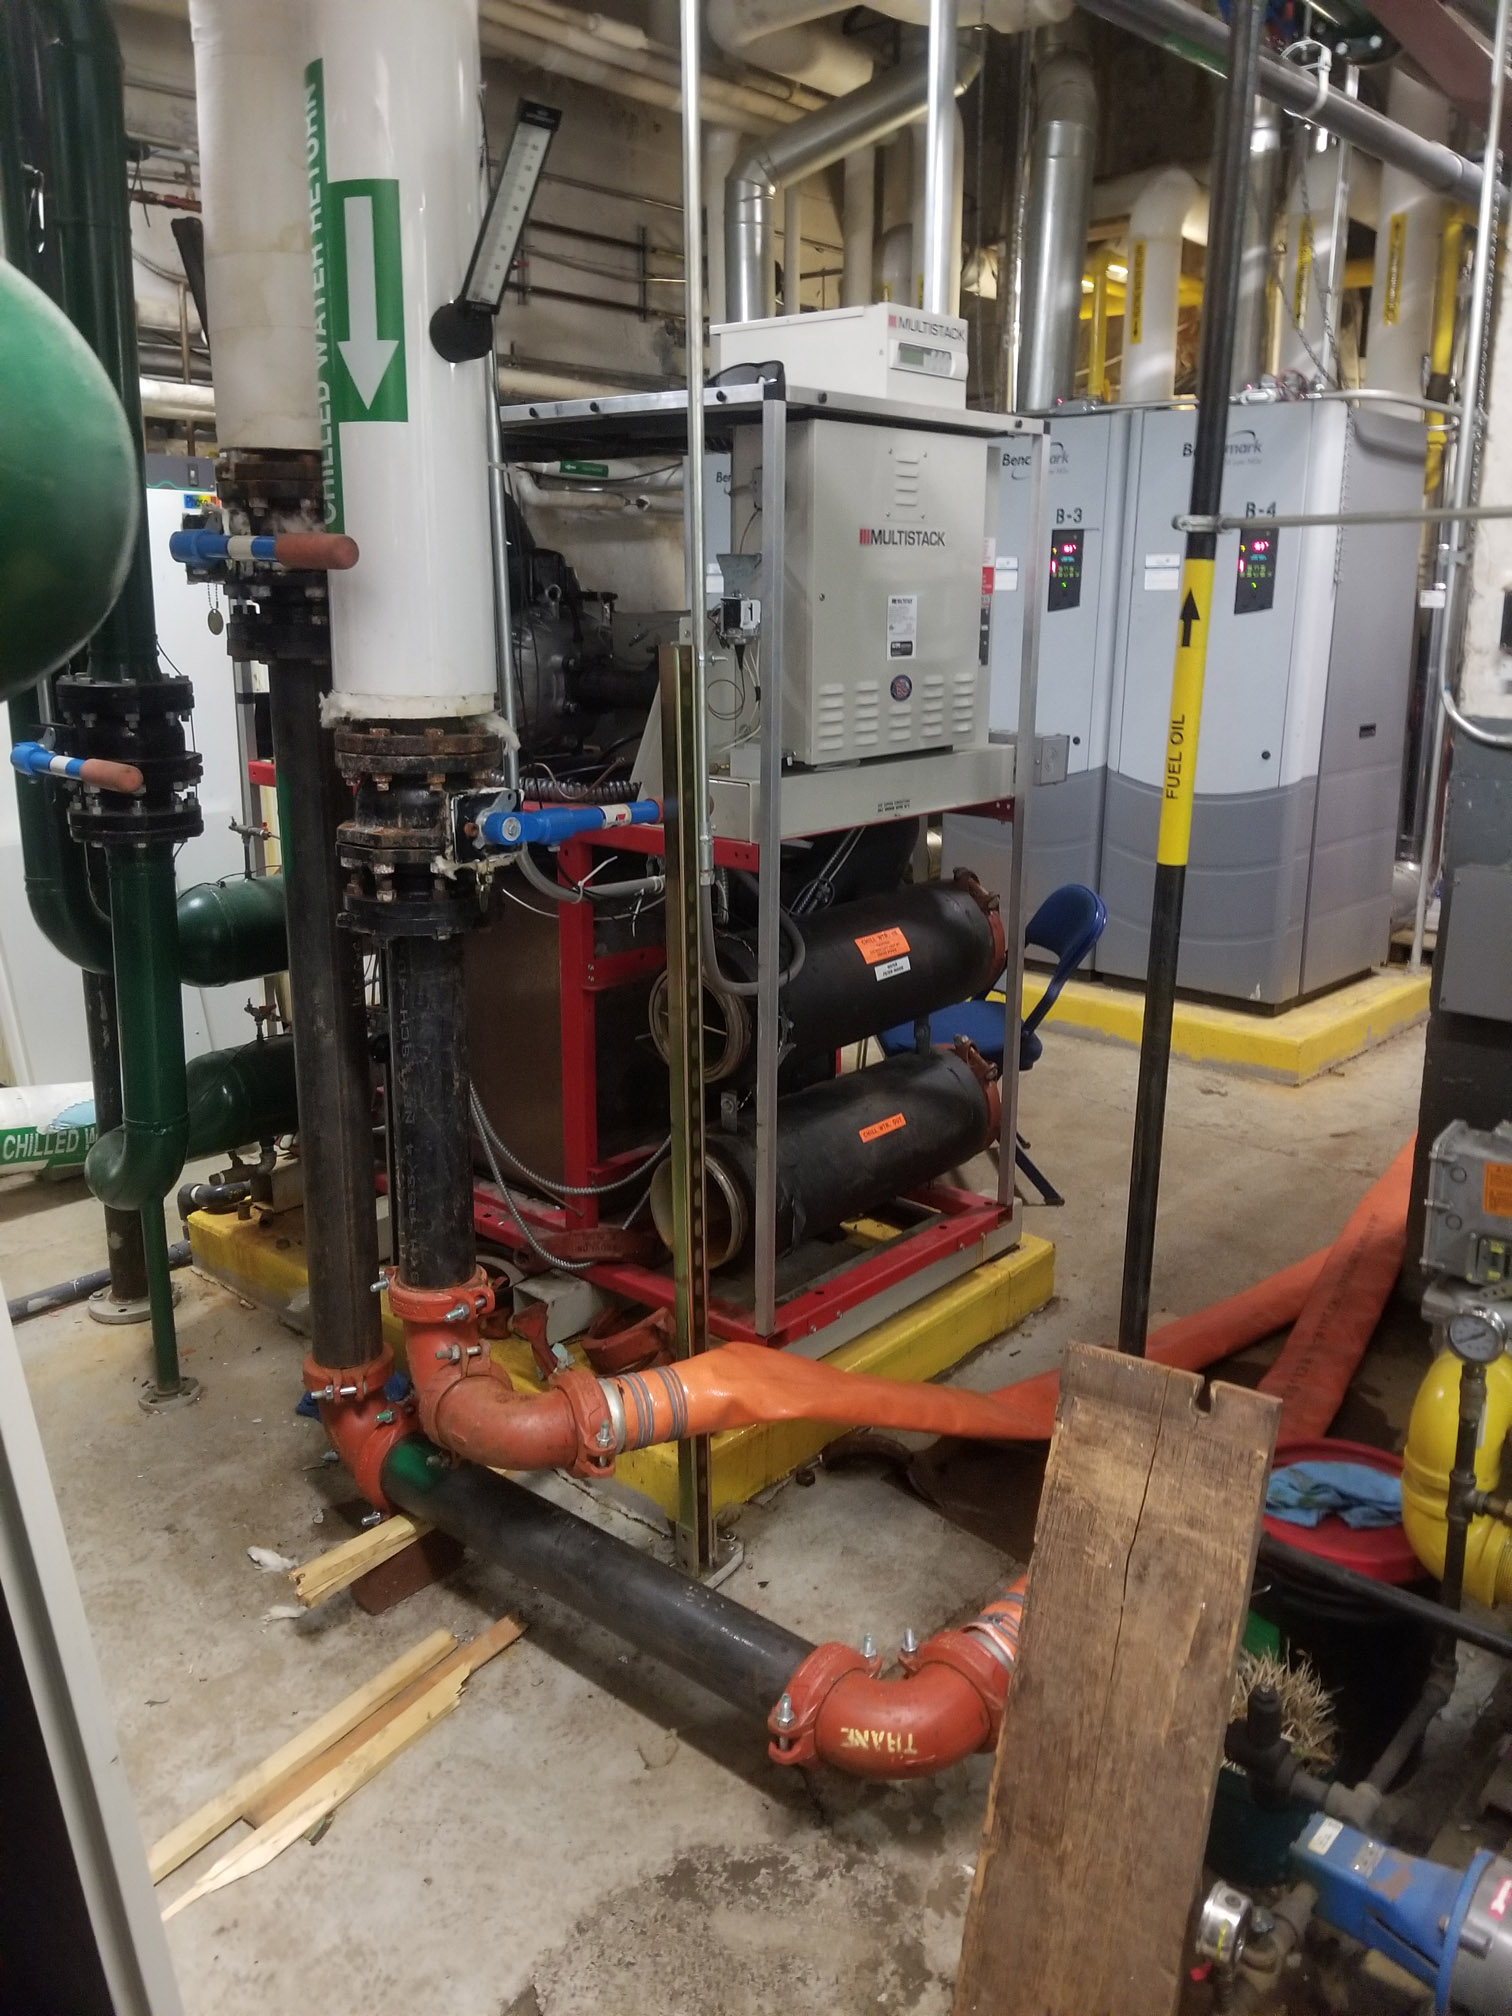 Air Cooled Chiller Rental Sumter County FL, Chiller AC Rental Sumter County FL, Temporary Chiller Sumter County FL, Rental Chiller Installation Sumter County FL